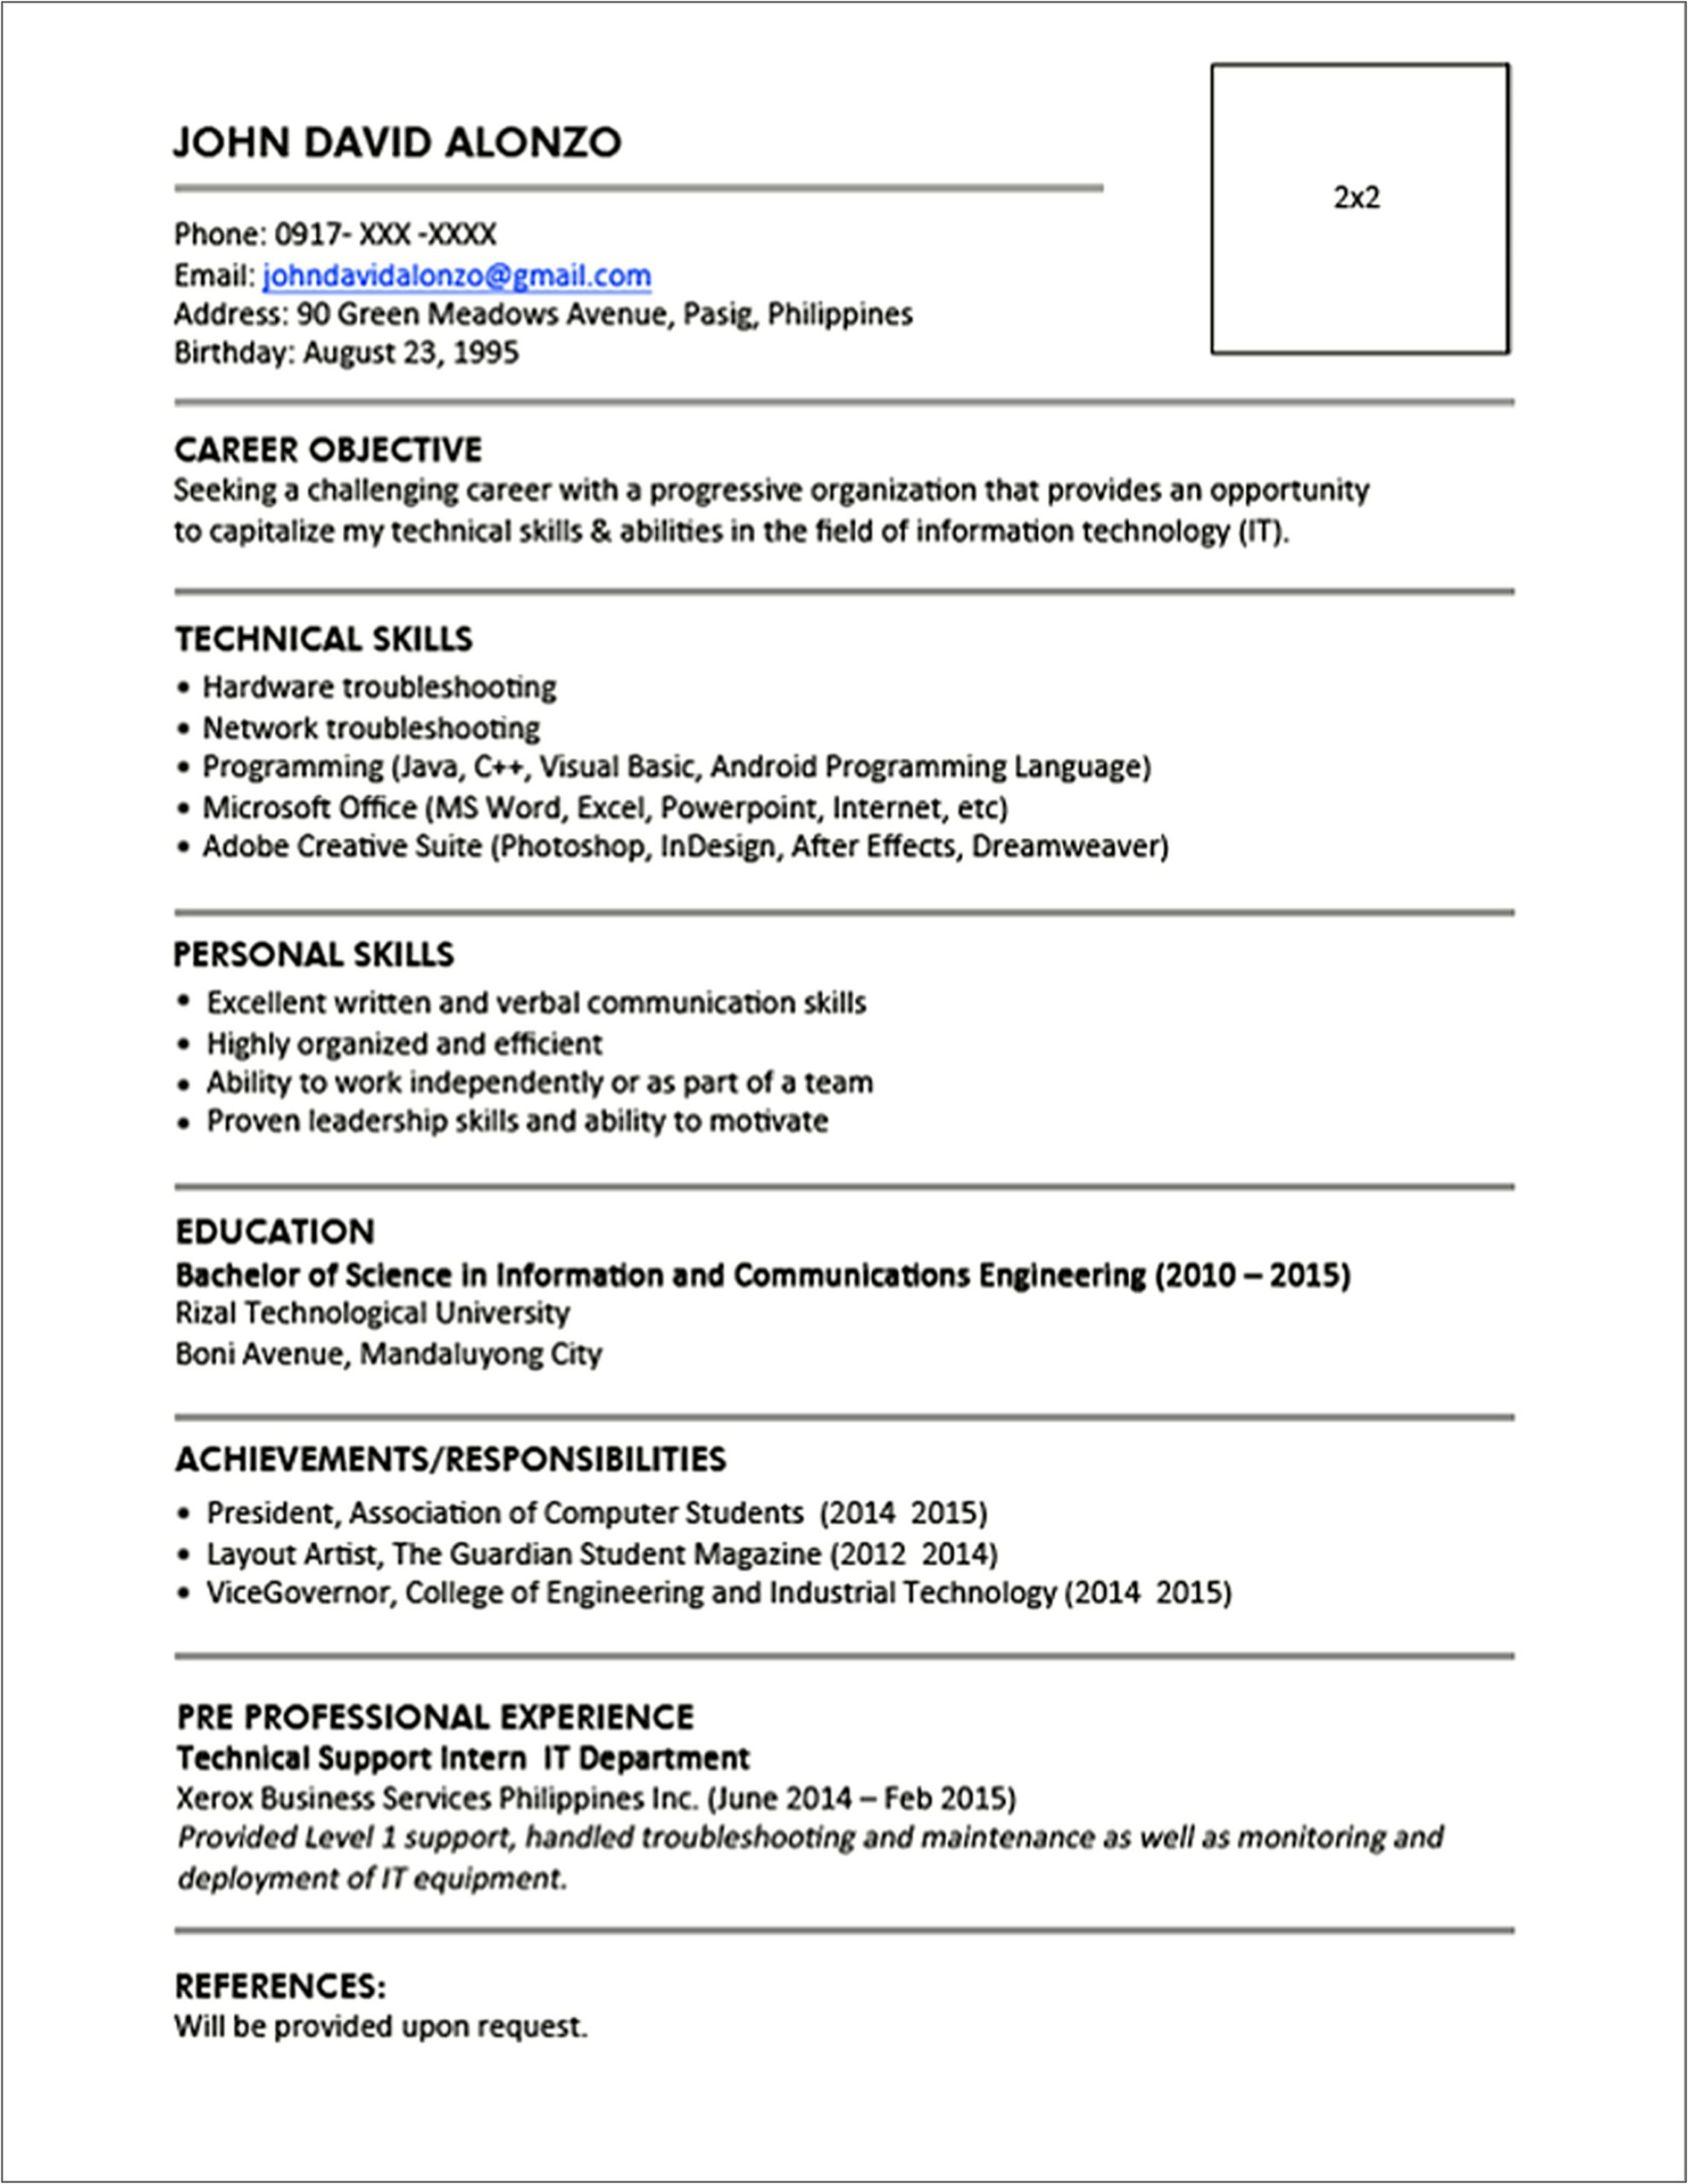 Time At Job Format On A Resume